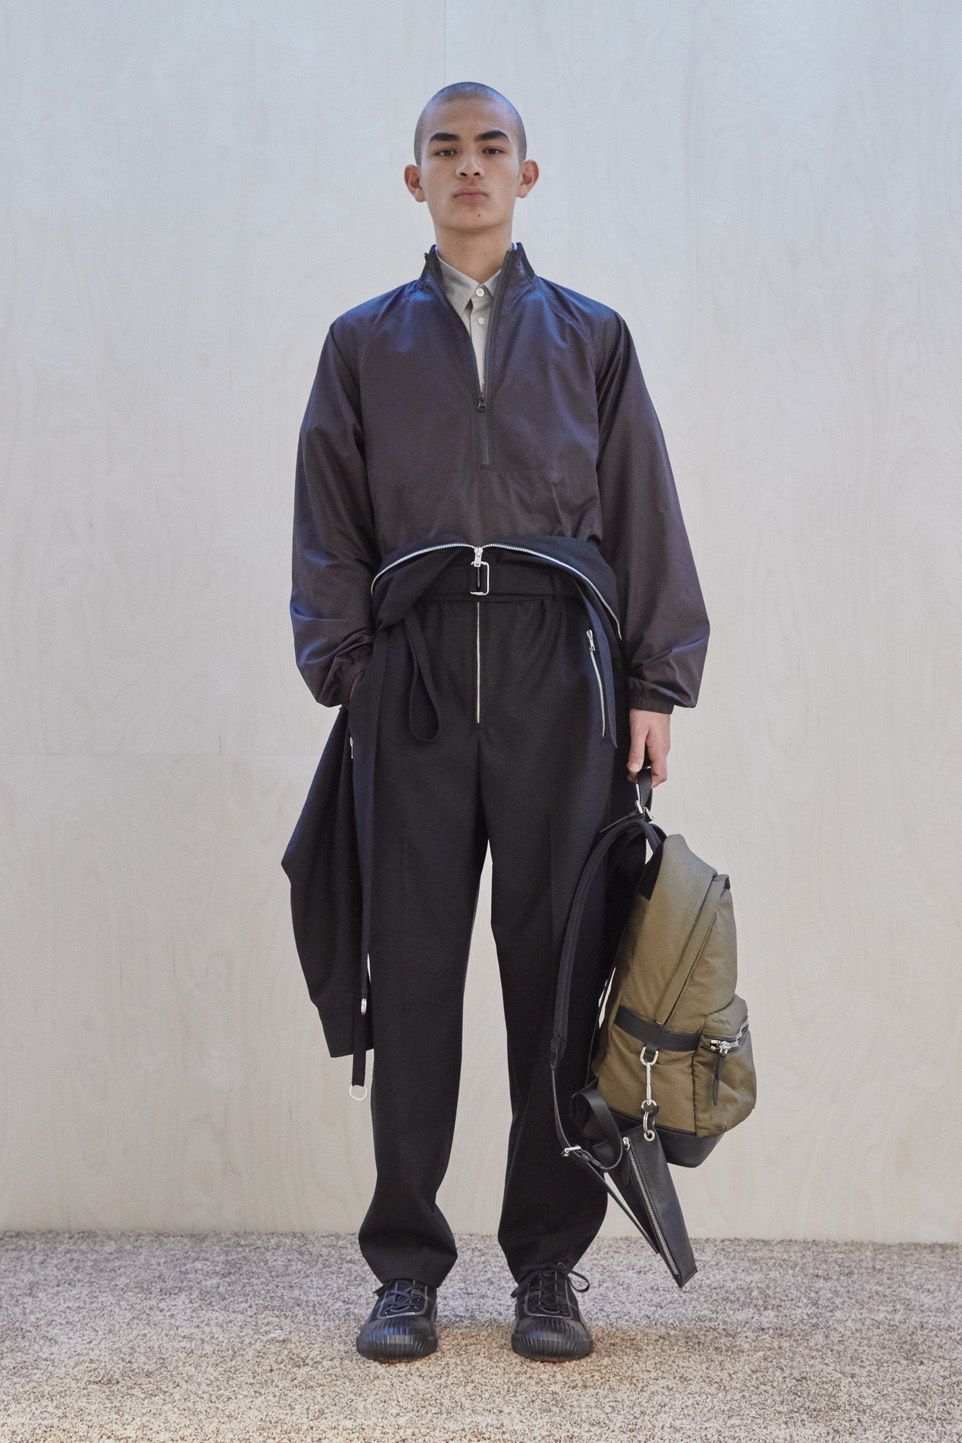 Plim FW19 Mens Collections Lores 26 3.1 phillip lim fall 2019